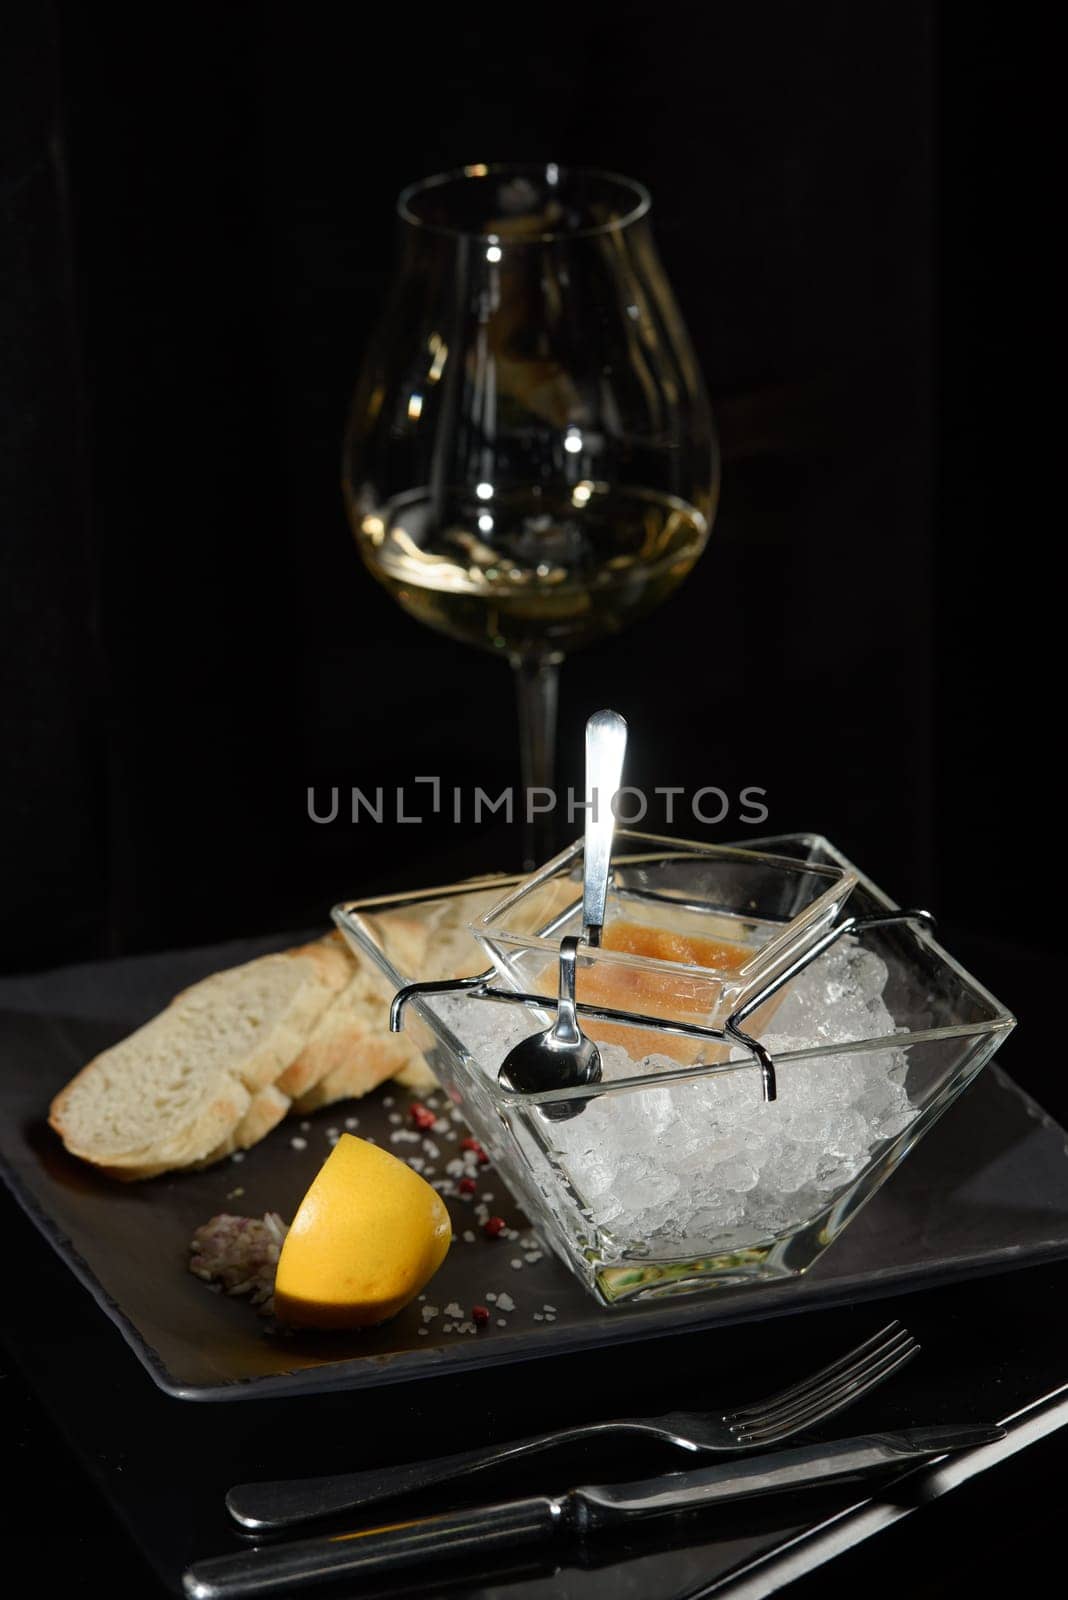 Pike fish caviar, on ice, with croutons, lemon, on a transparent dish, on a dark background by Ashtray25